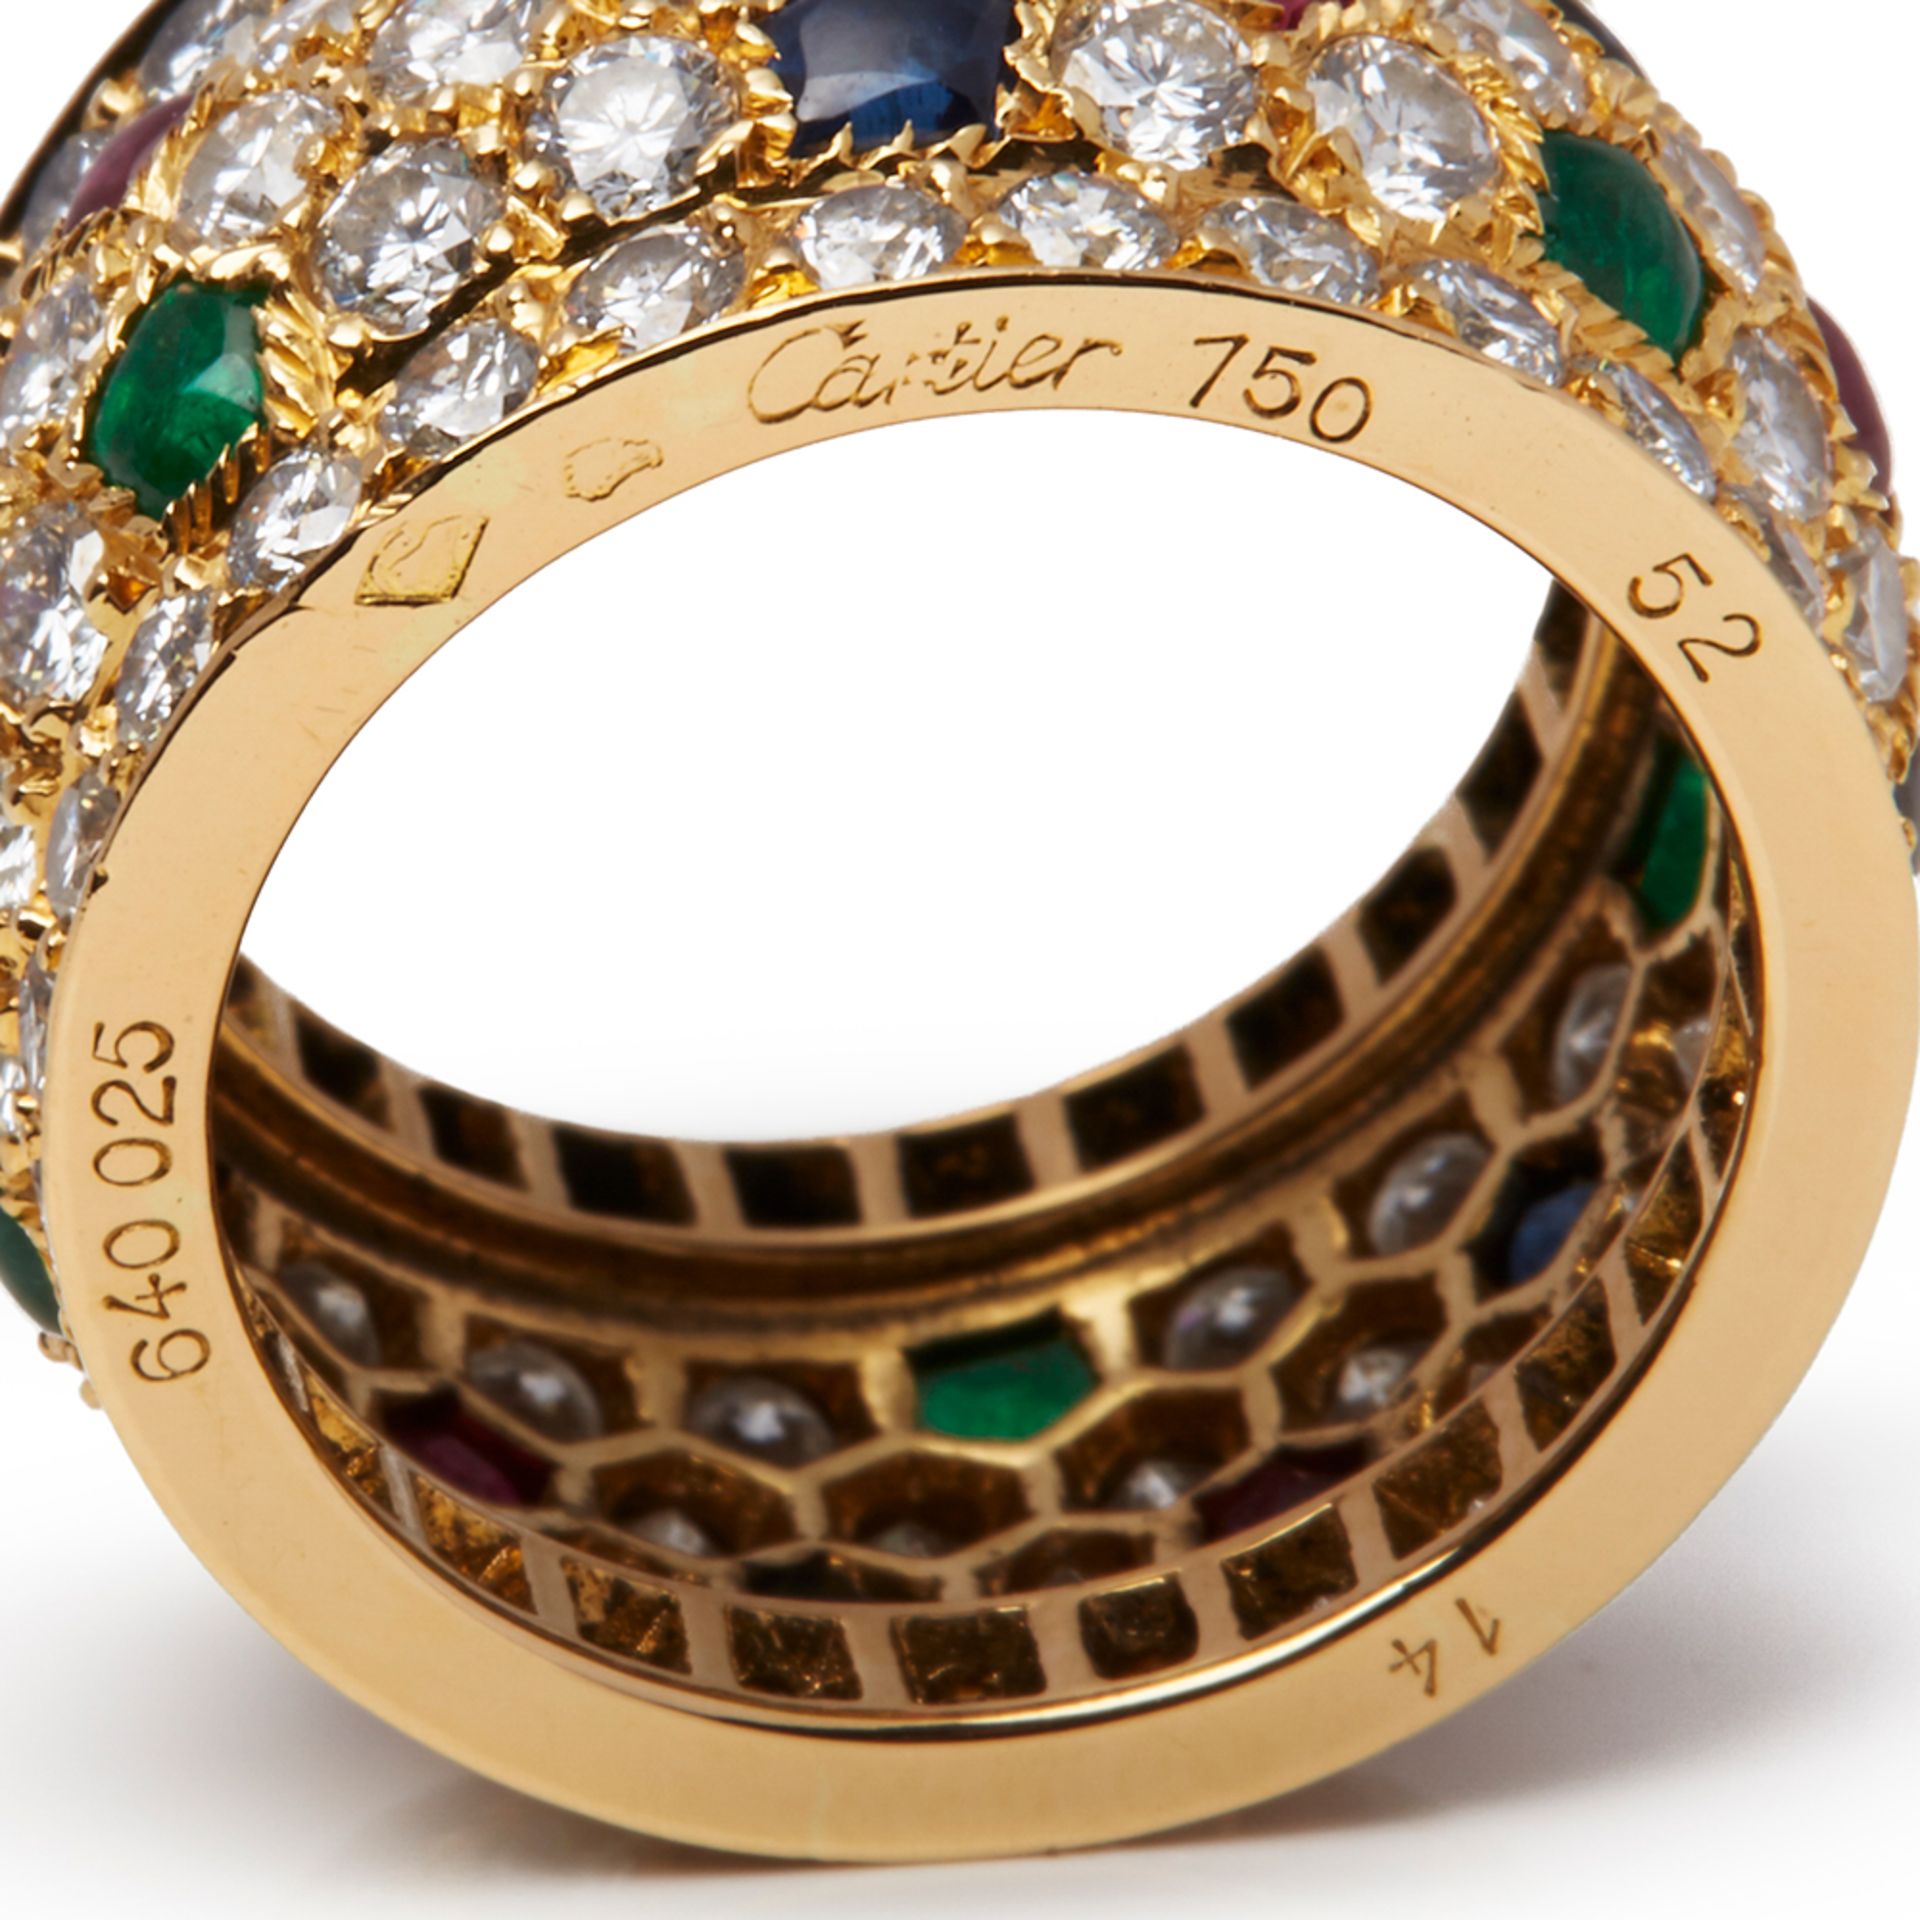 Cartier 18k Yellow Gold Nigeria Ring - Image 6 of 7